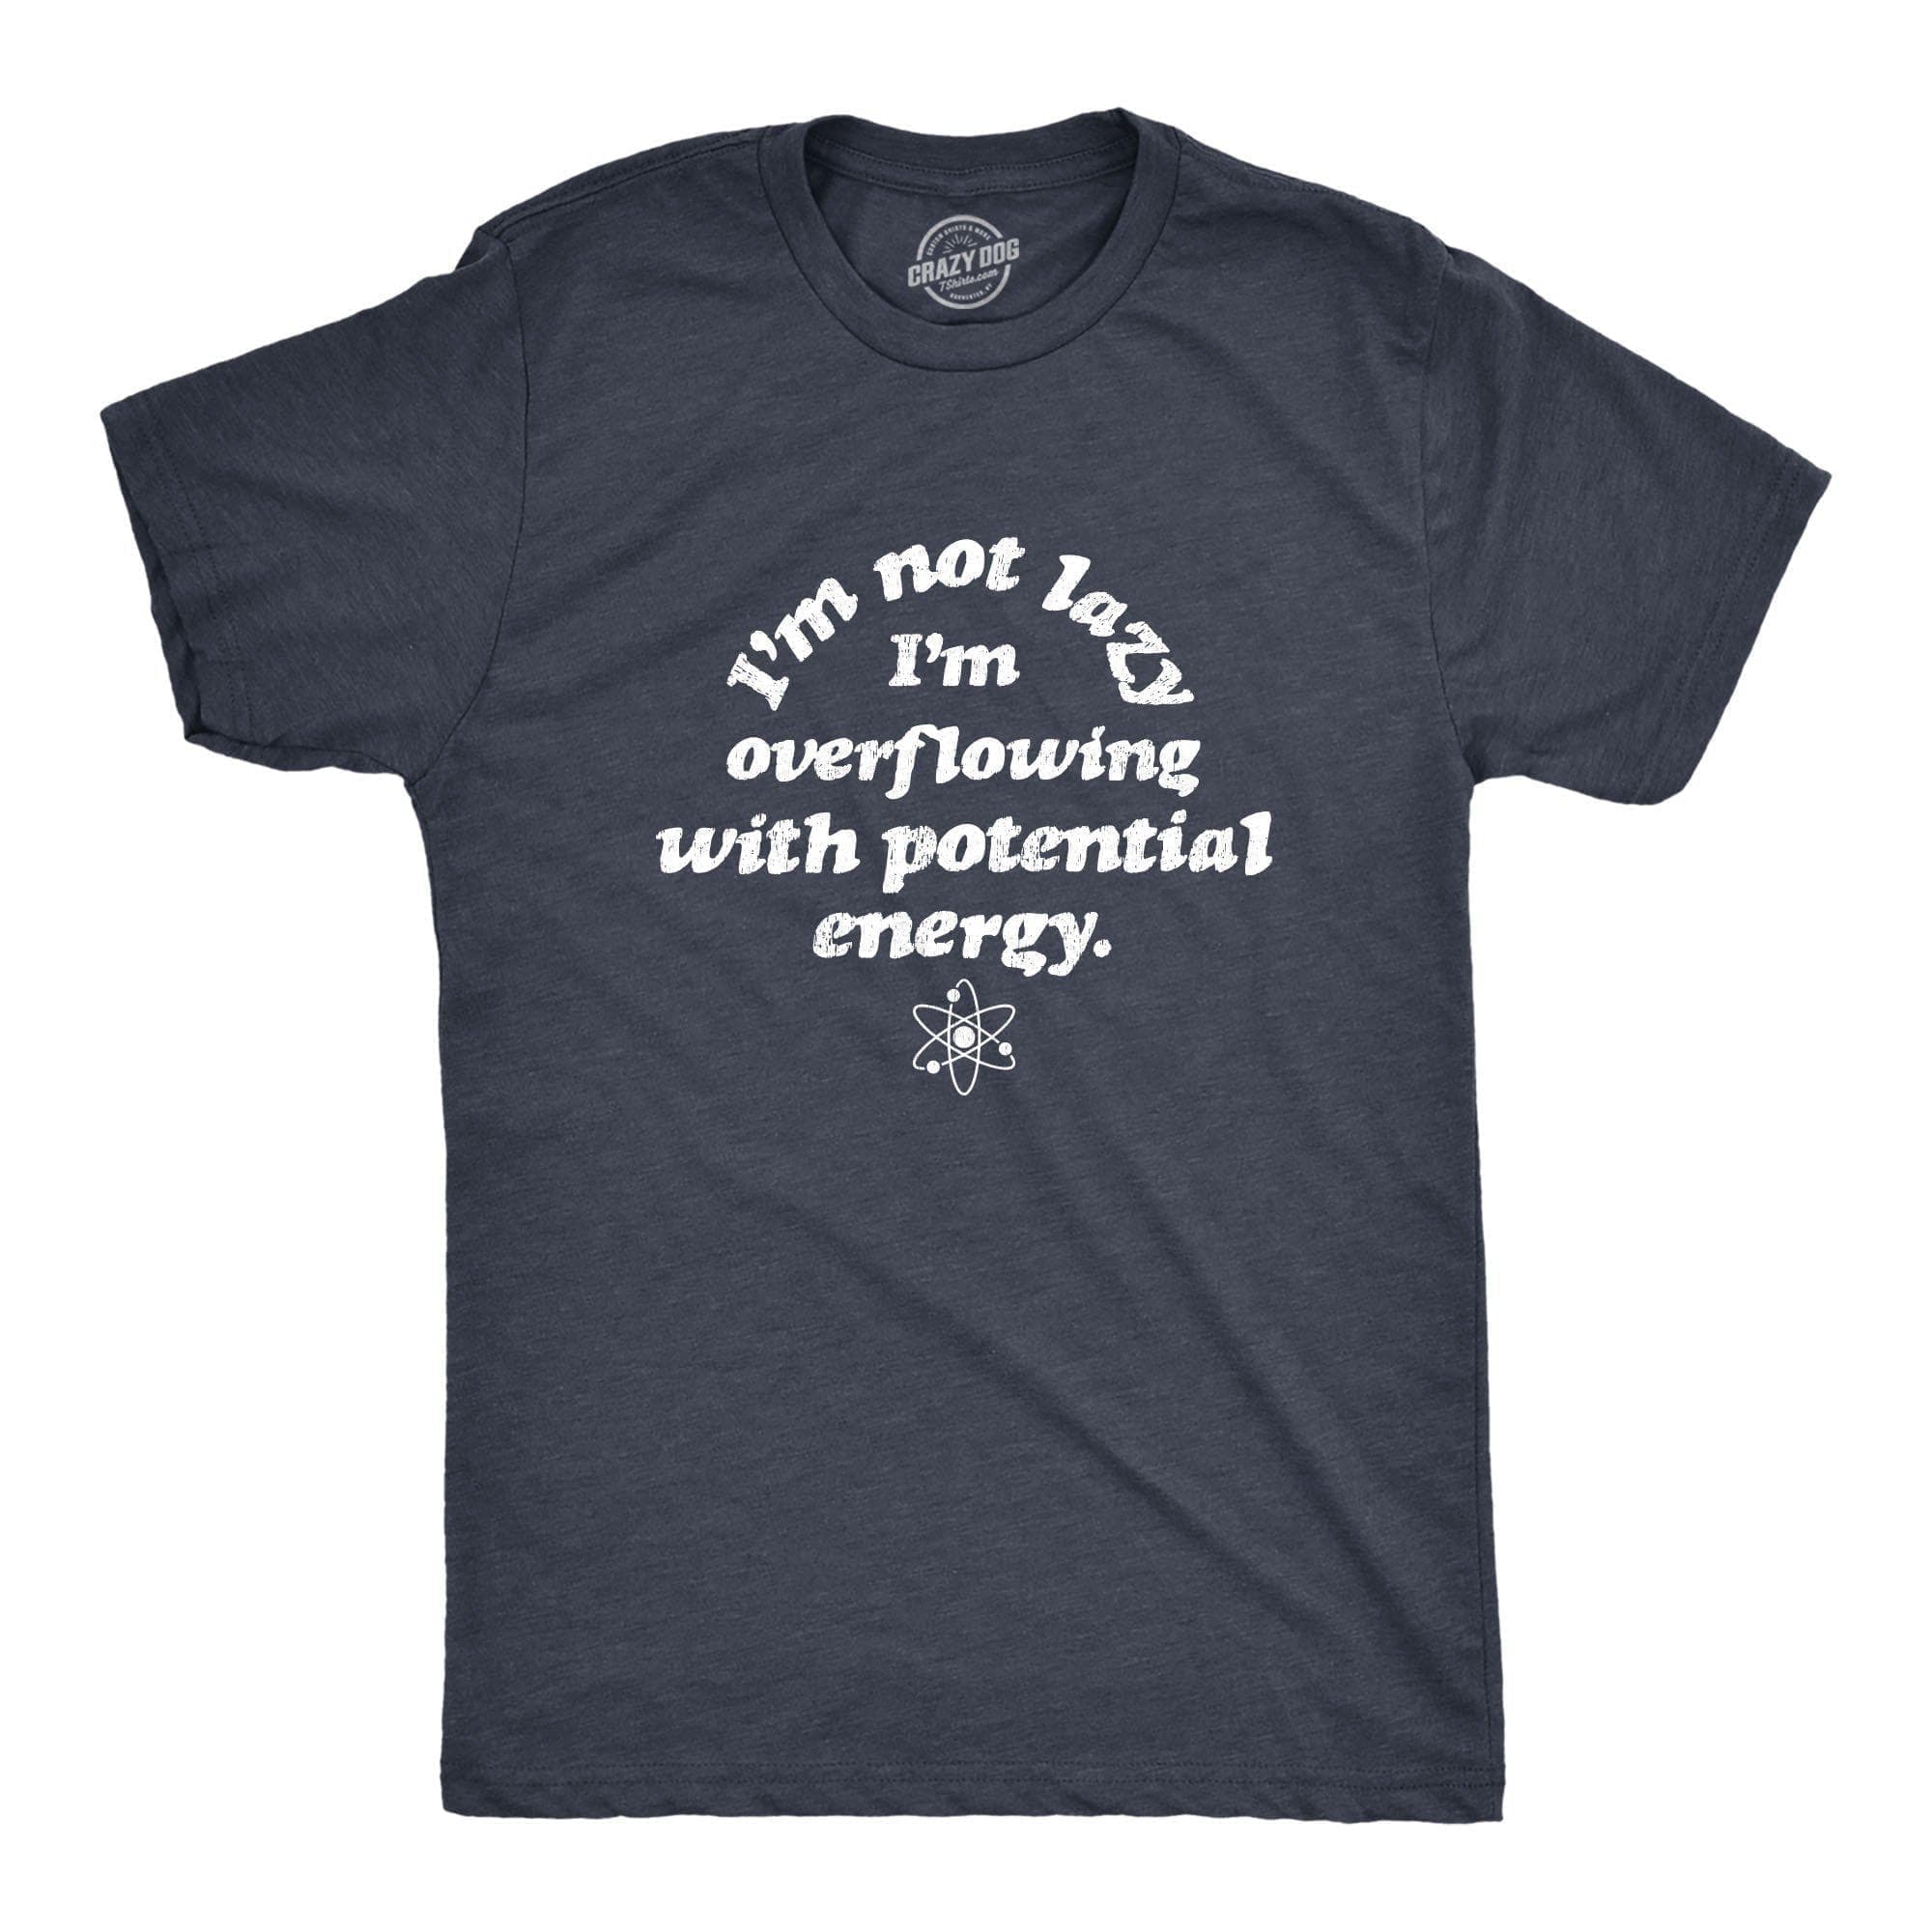 I'm Not Lazy I'm Overflowing With Potential Energy Men's Tshirt - Crazy Dog T-Shirts